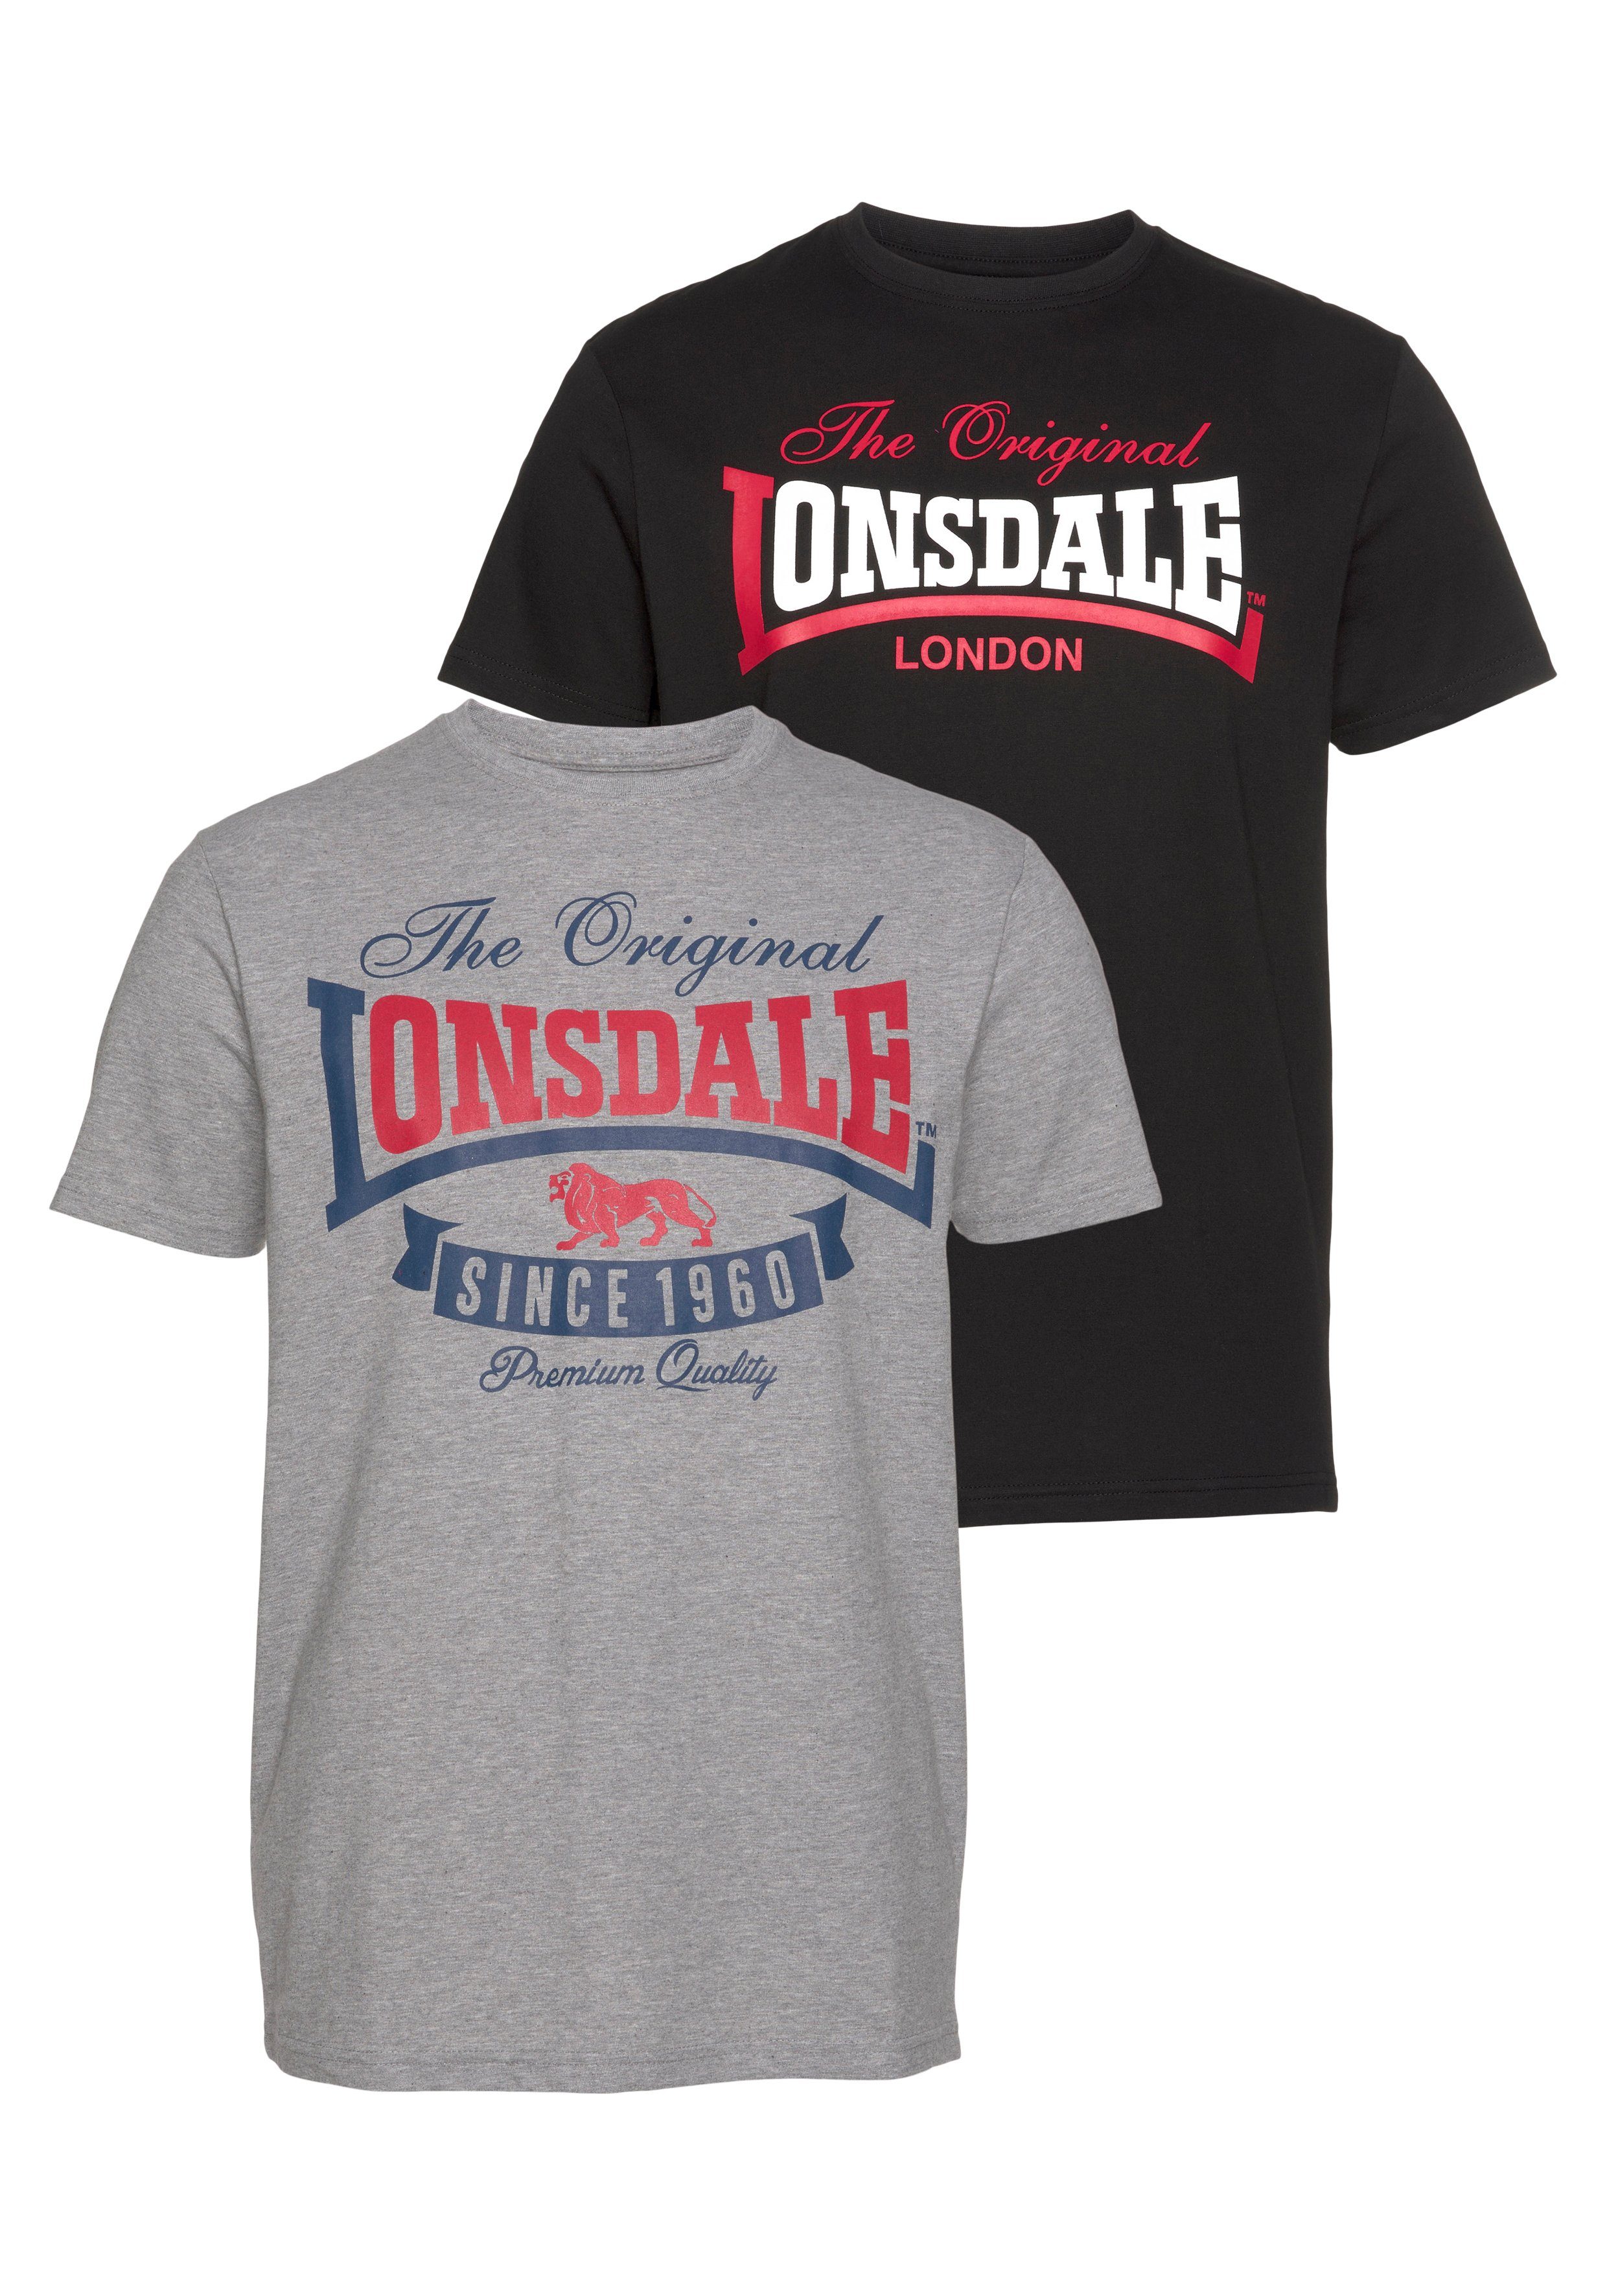 GEARACH T-Shirt Lonsdale (Packung, 2er-Pack)